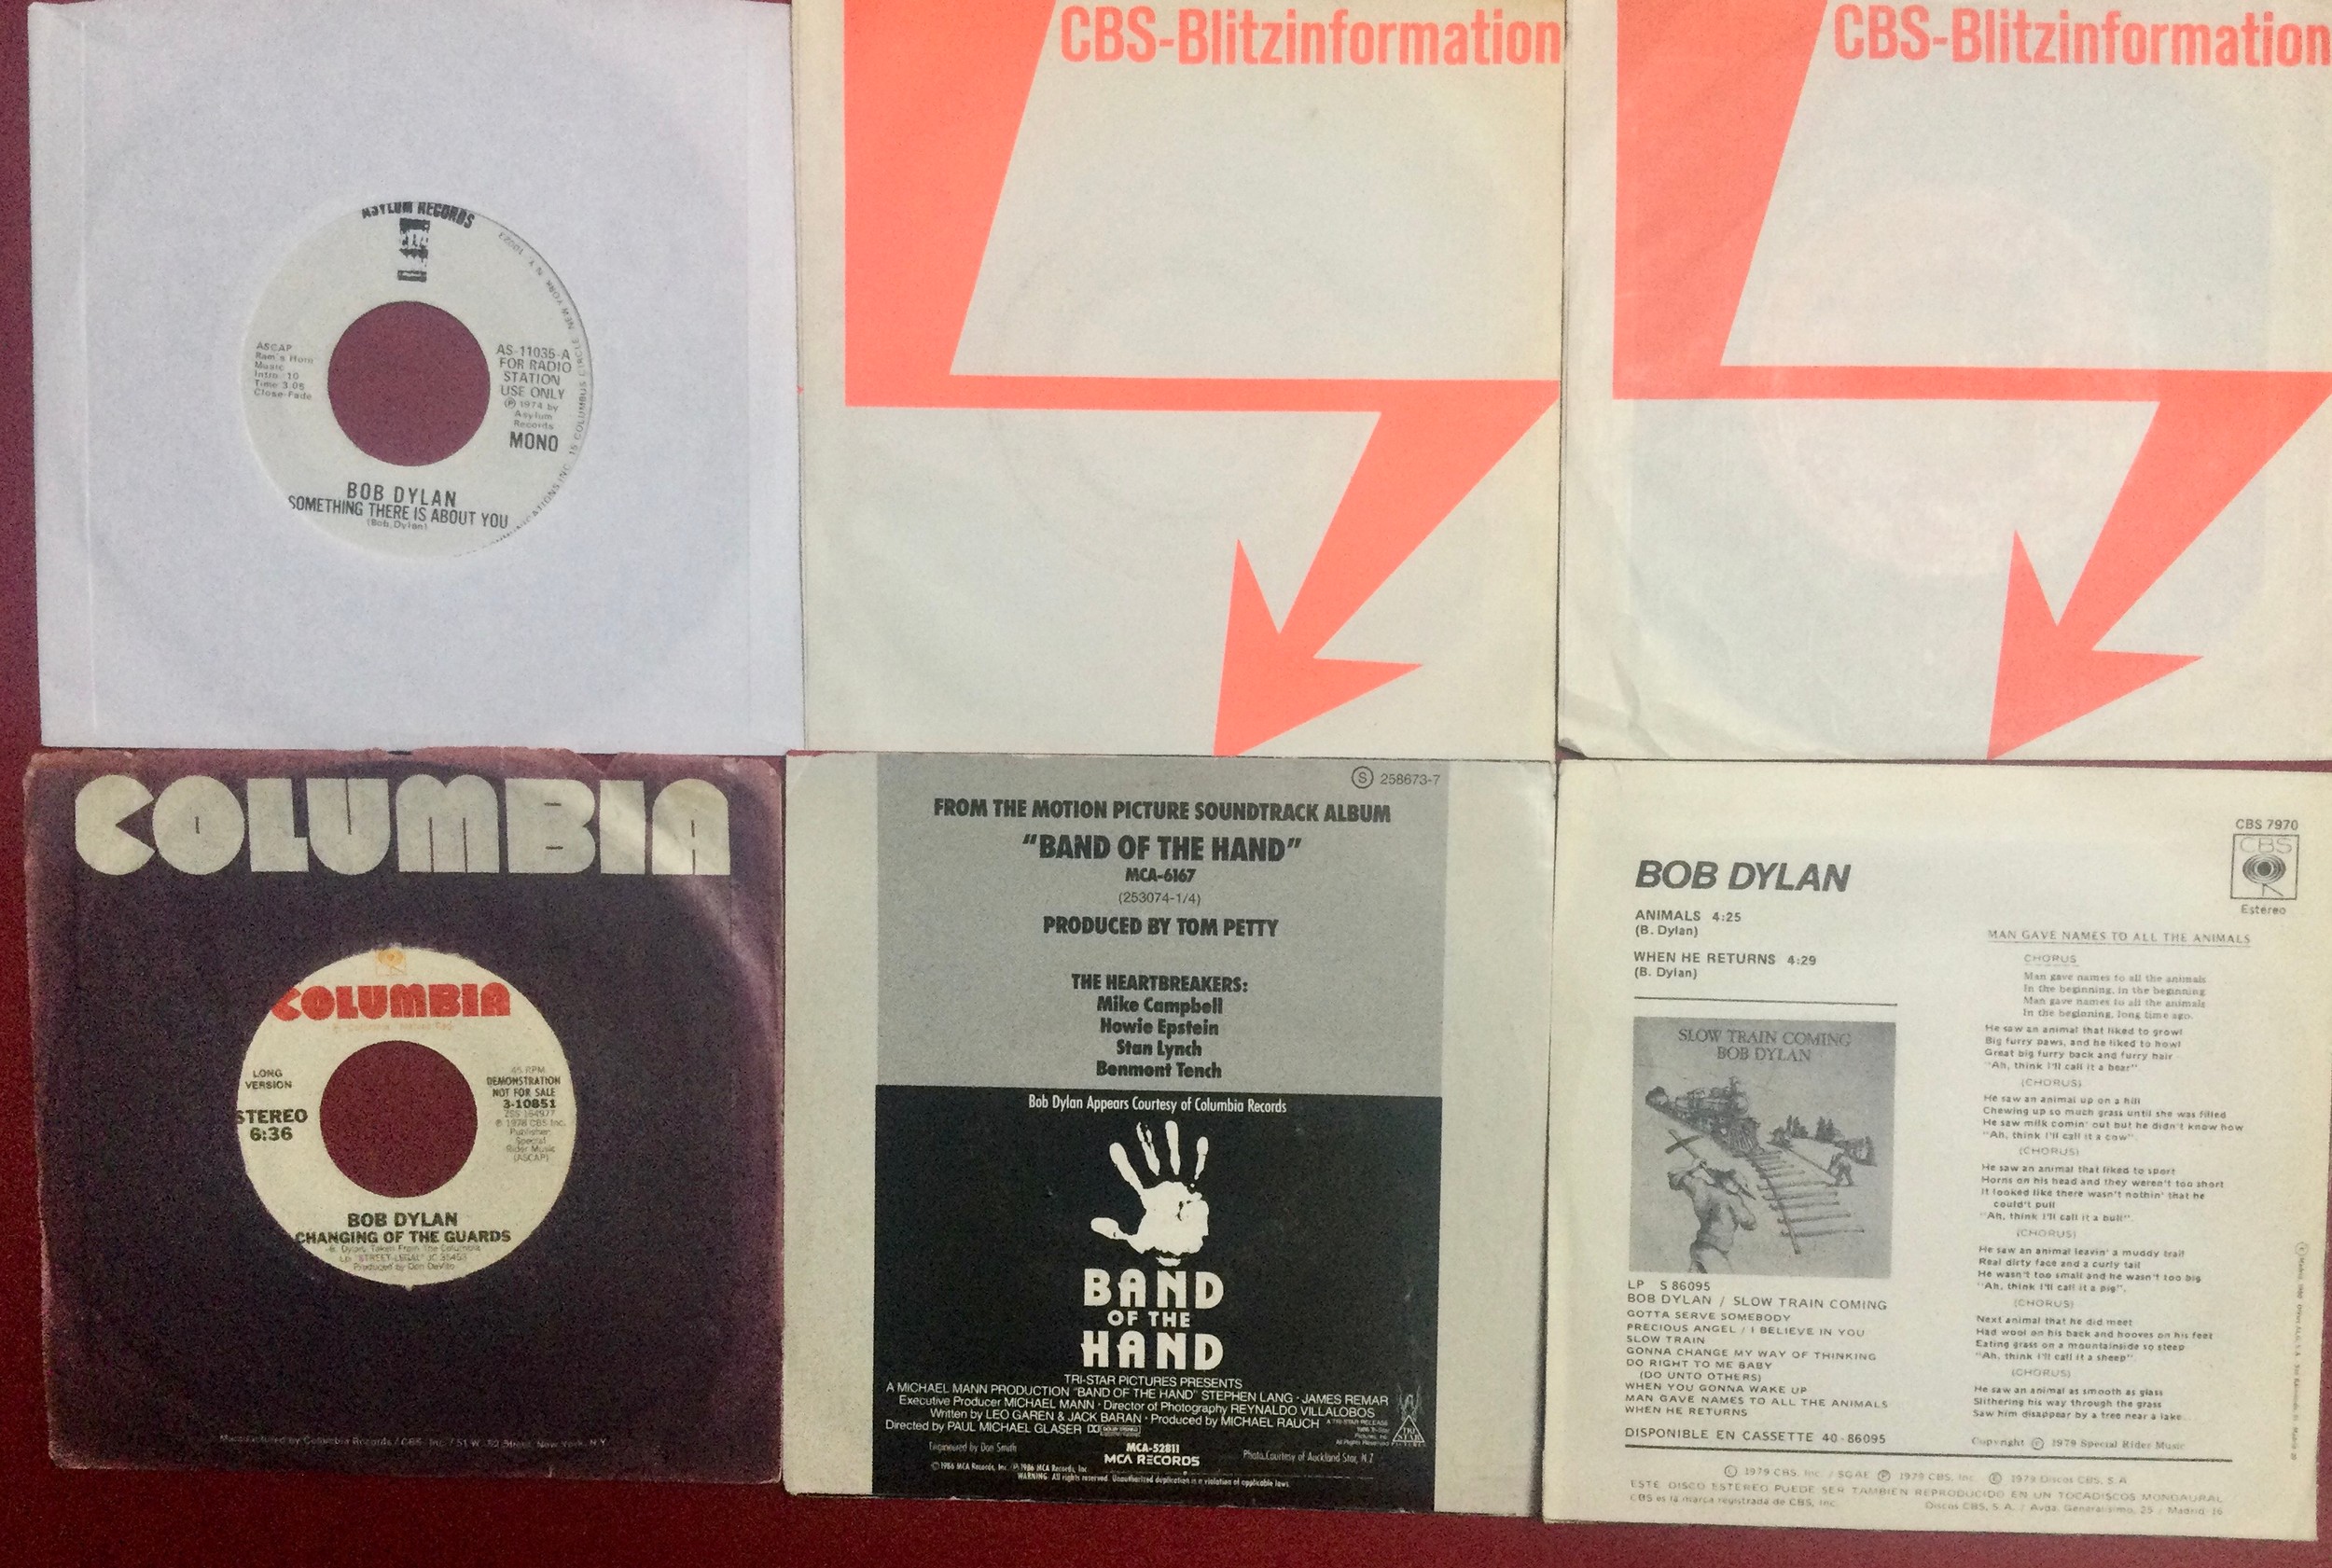 SELECTION OF 6 FOREIGN DEMO RECORDS. Bob Dylan found here on demo records from Germany - Spain and - Image 2 of 2